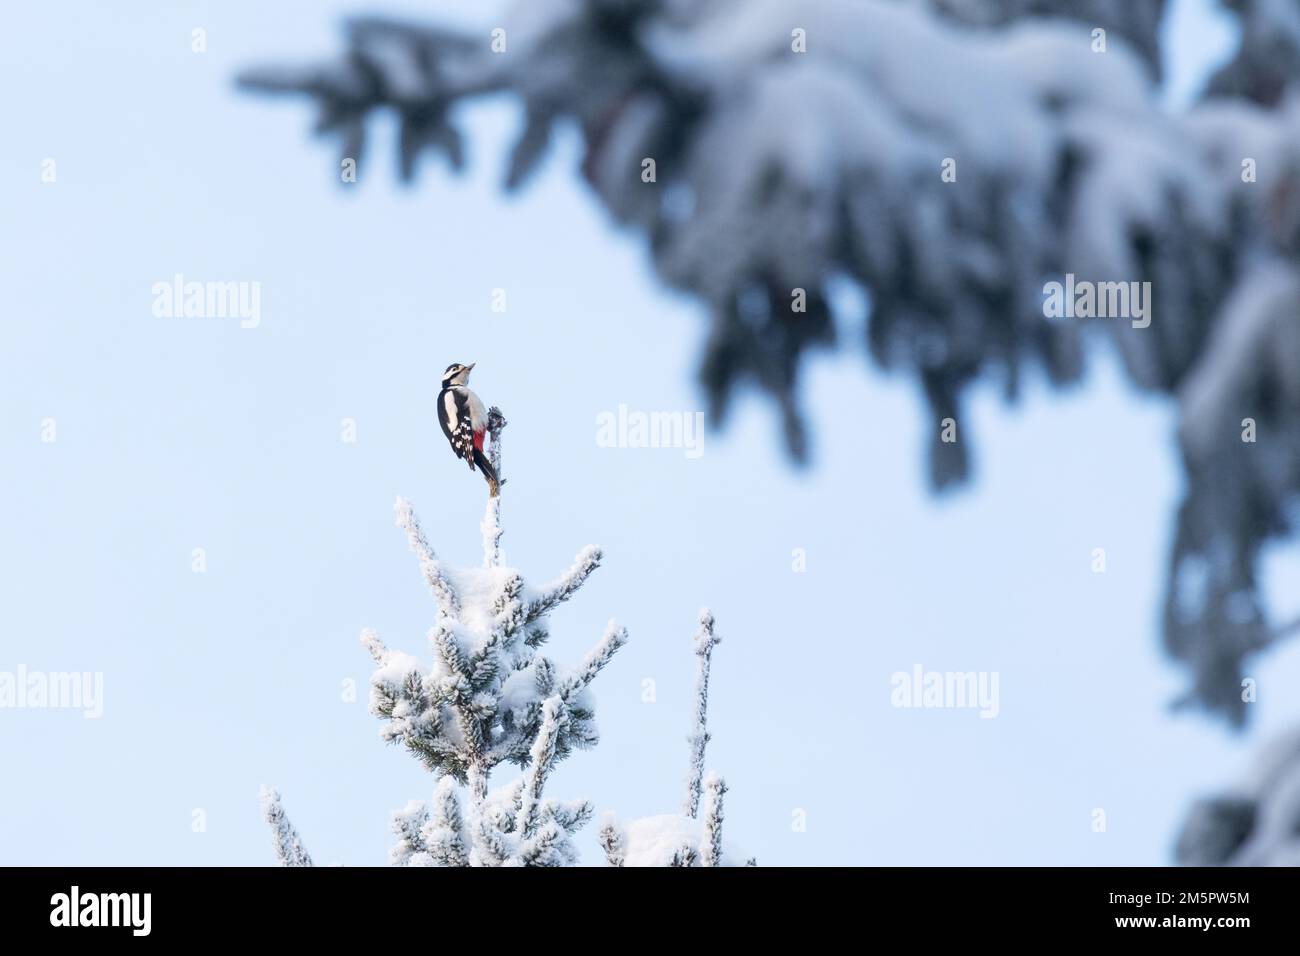 Great spotted woodpecker searching for food from a wintry boreal forest in Estonia, Northern Europe Stock Photo